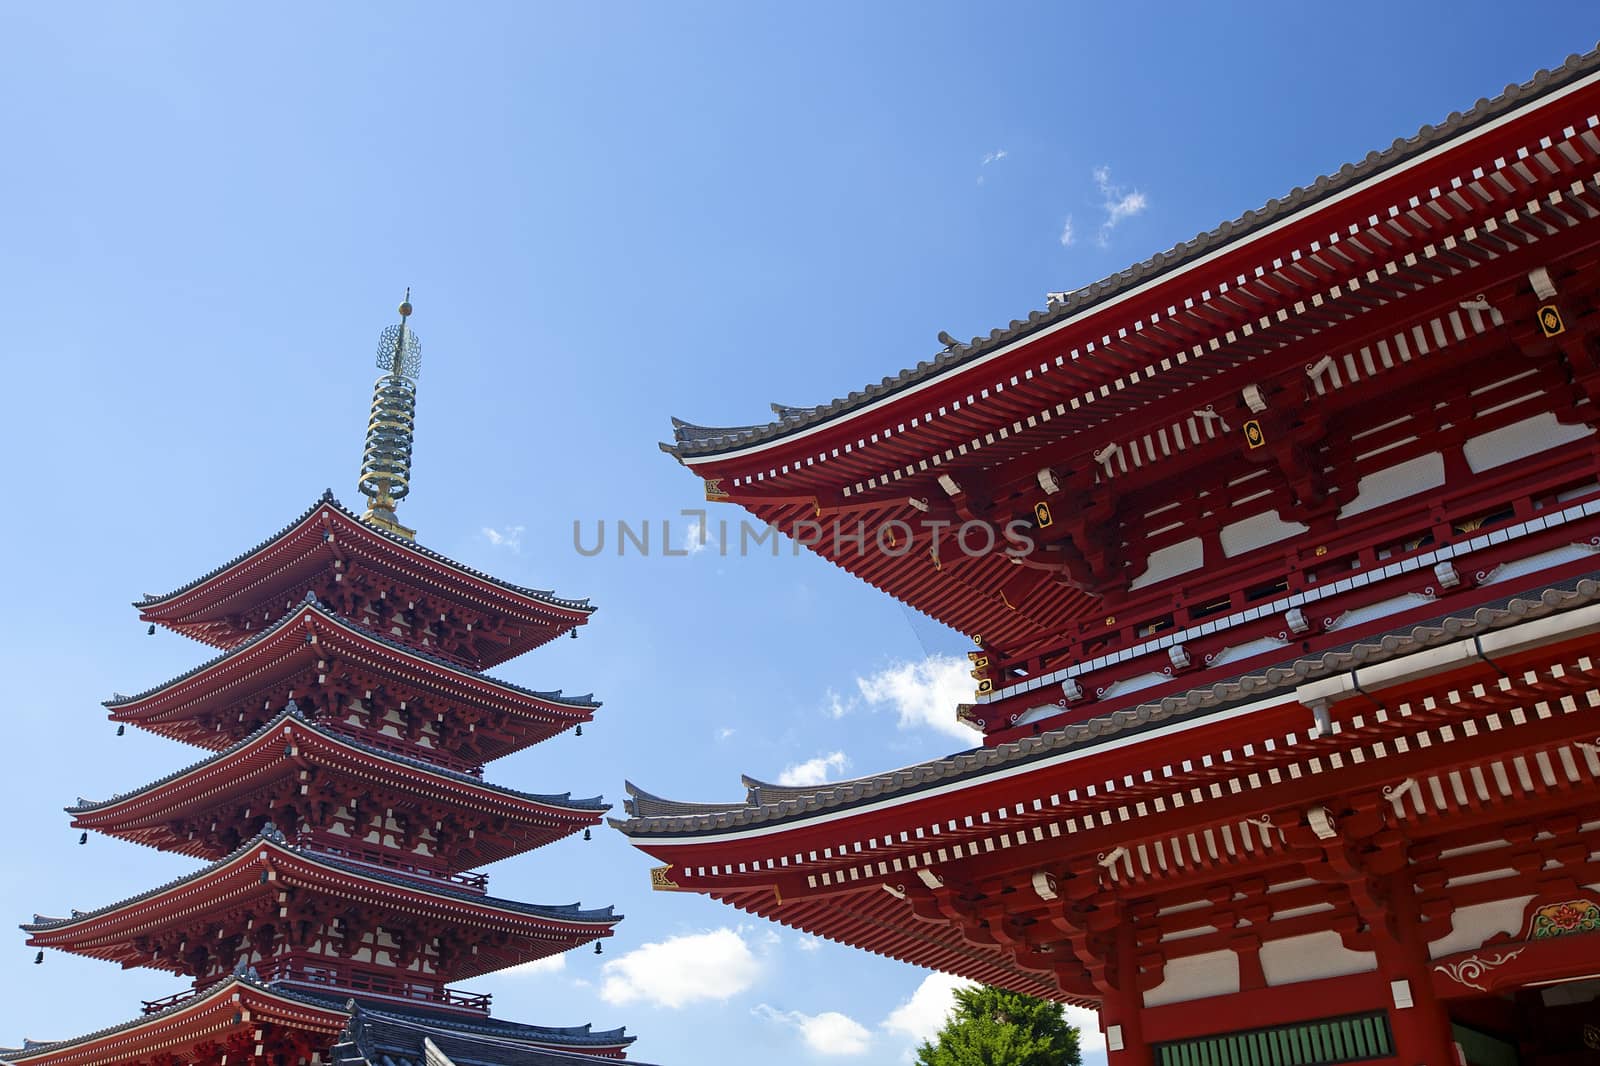 The Asakusa temple with the pagoda at daytime in Tokyo